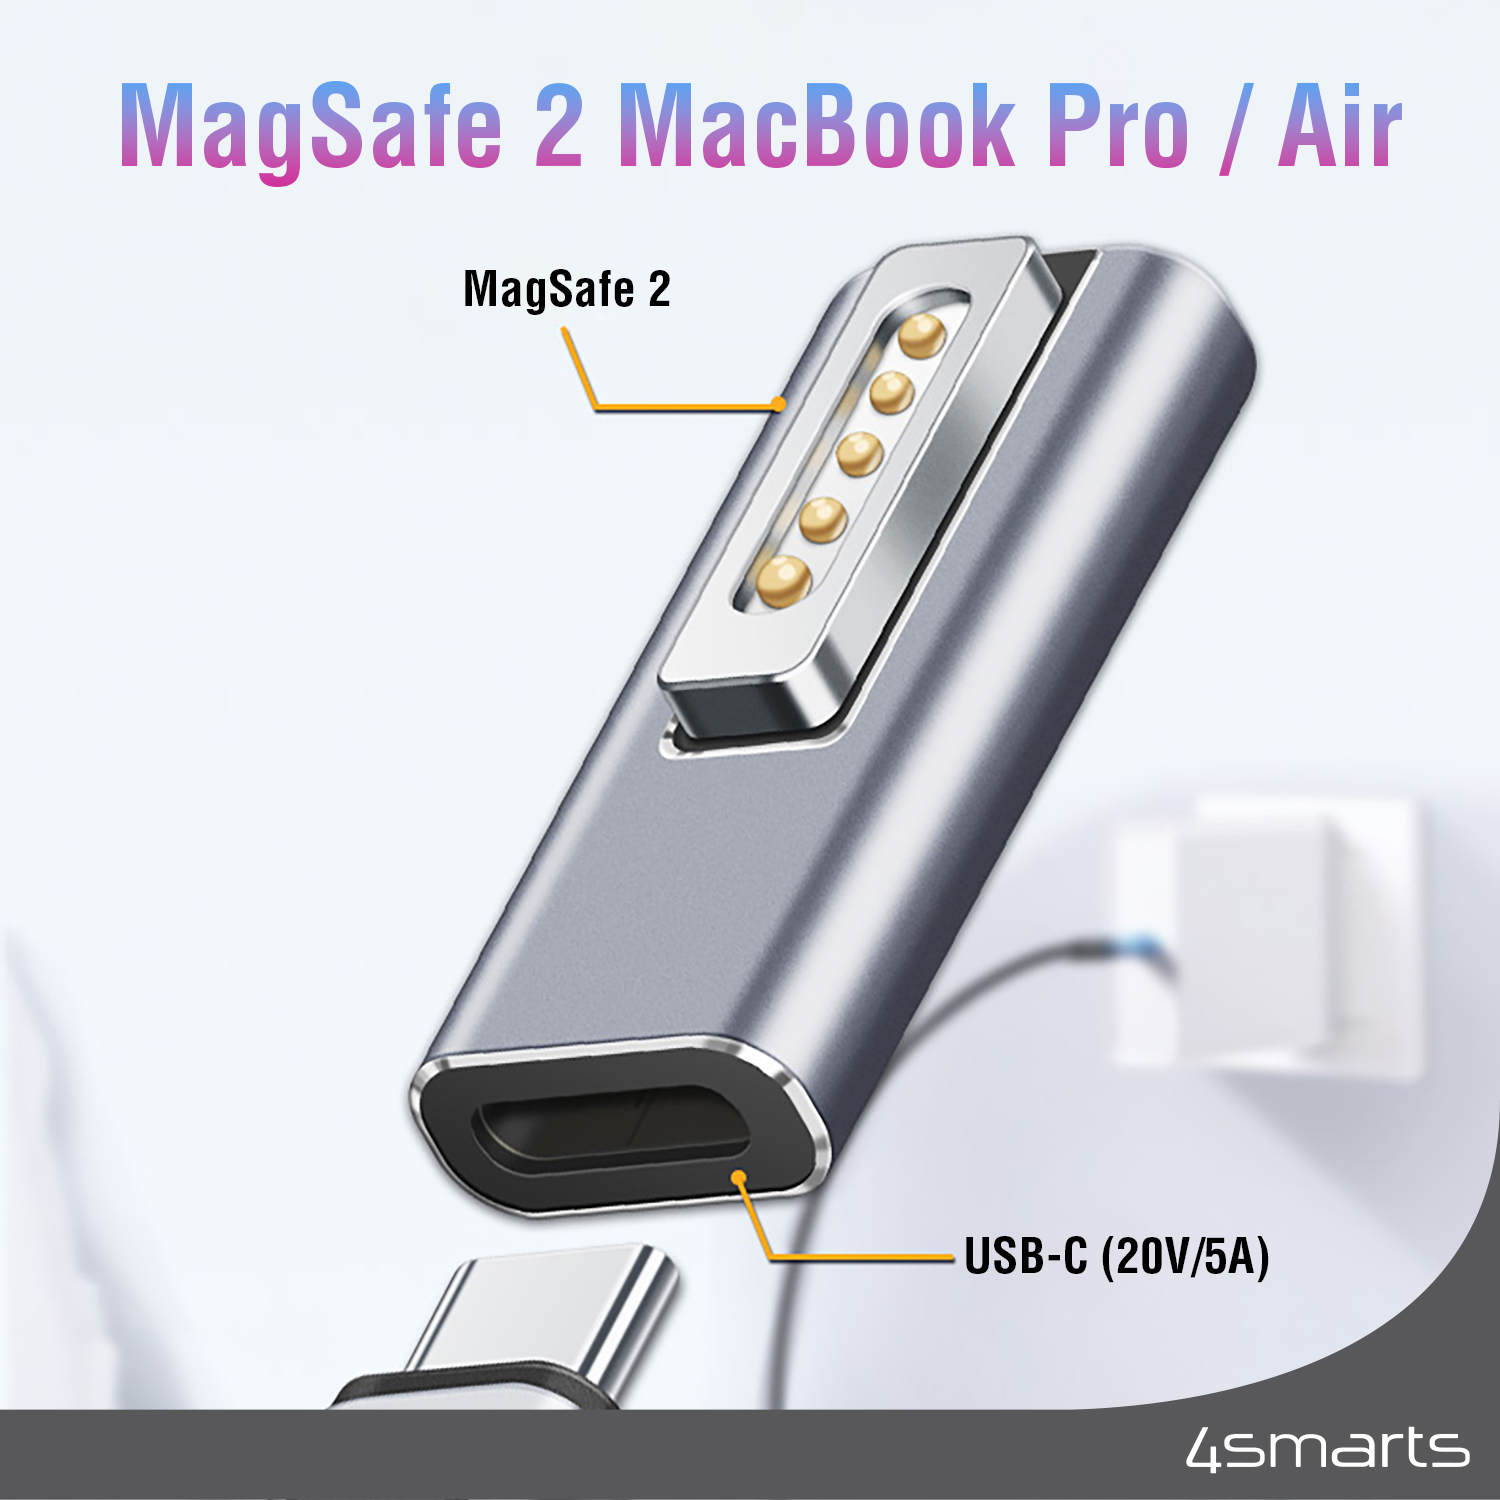 The 4smarts adapter USB-C PD 100W to MagSafe 2 was developed exclusively for MacBook Pro and MacBook Air.